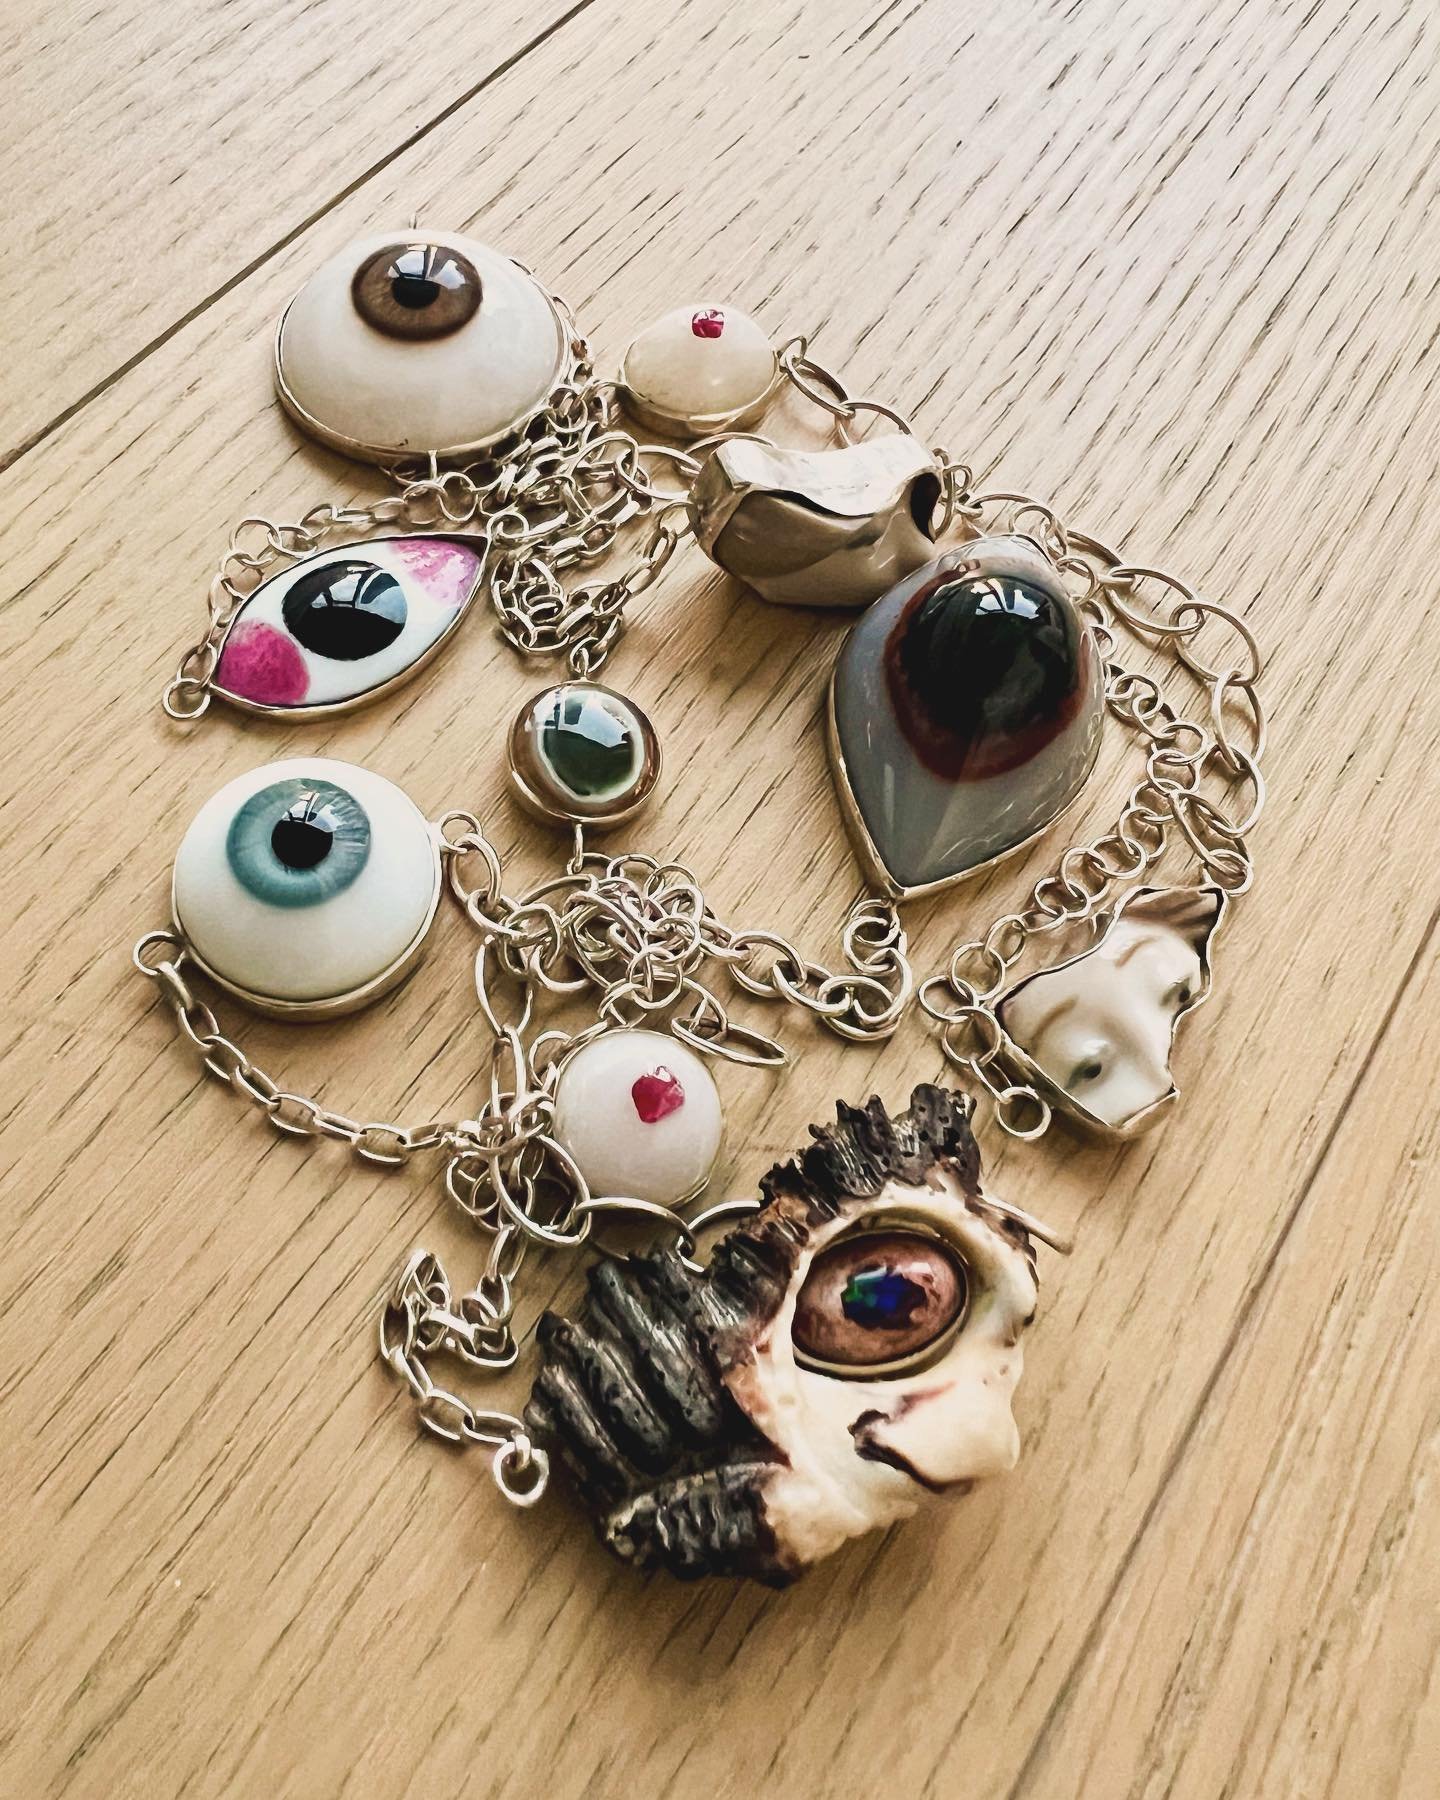 One of my favourite necklaces, a living creation, that I am definitely looking forwards to lengthening with this new found eyeball! 
 
Follow or DM☝🏼@suzetteoneofakindjewelry for more &lsquo;one of a kind&rsquo; jewelry!
-
-
-
#eyes #chainnecklace #